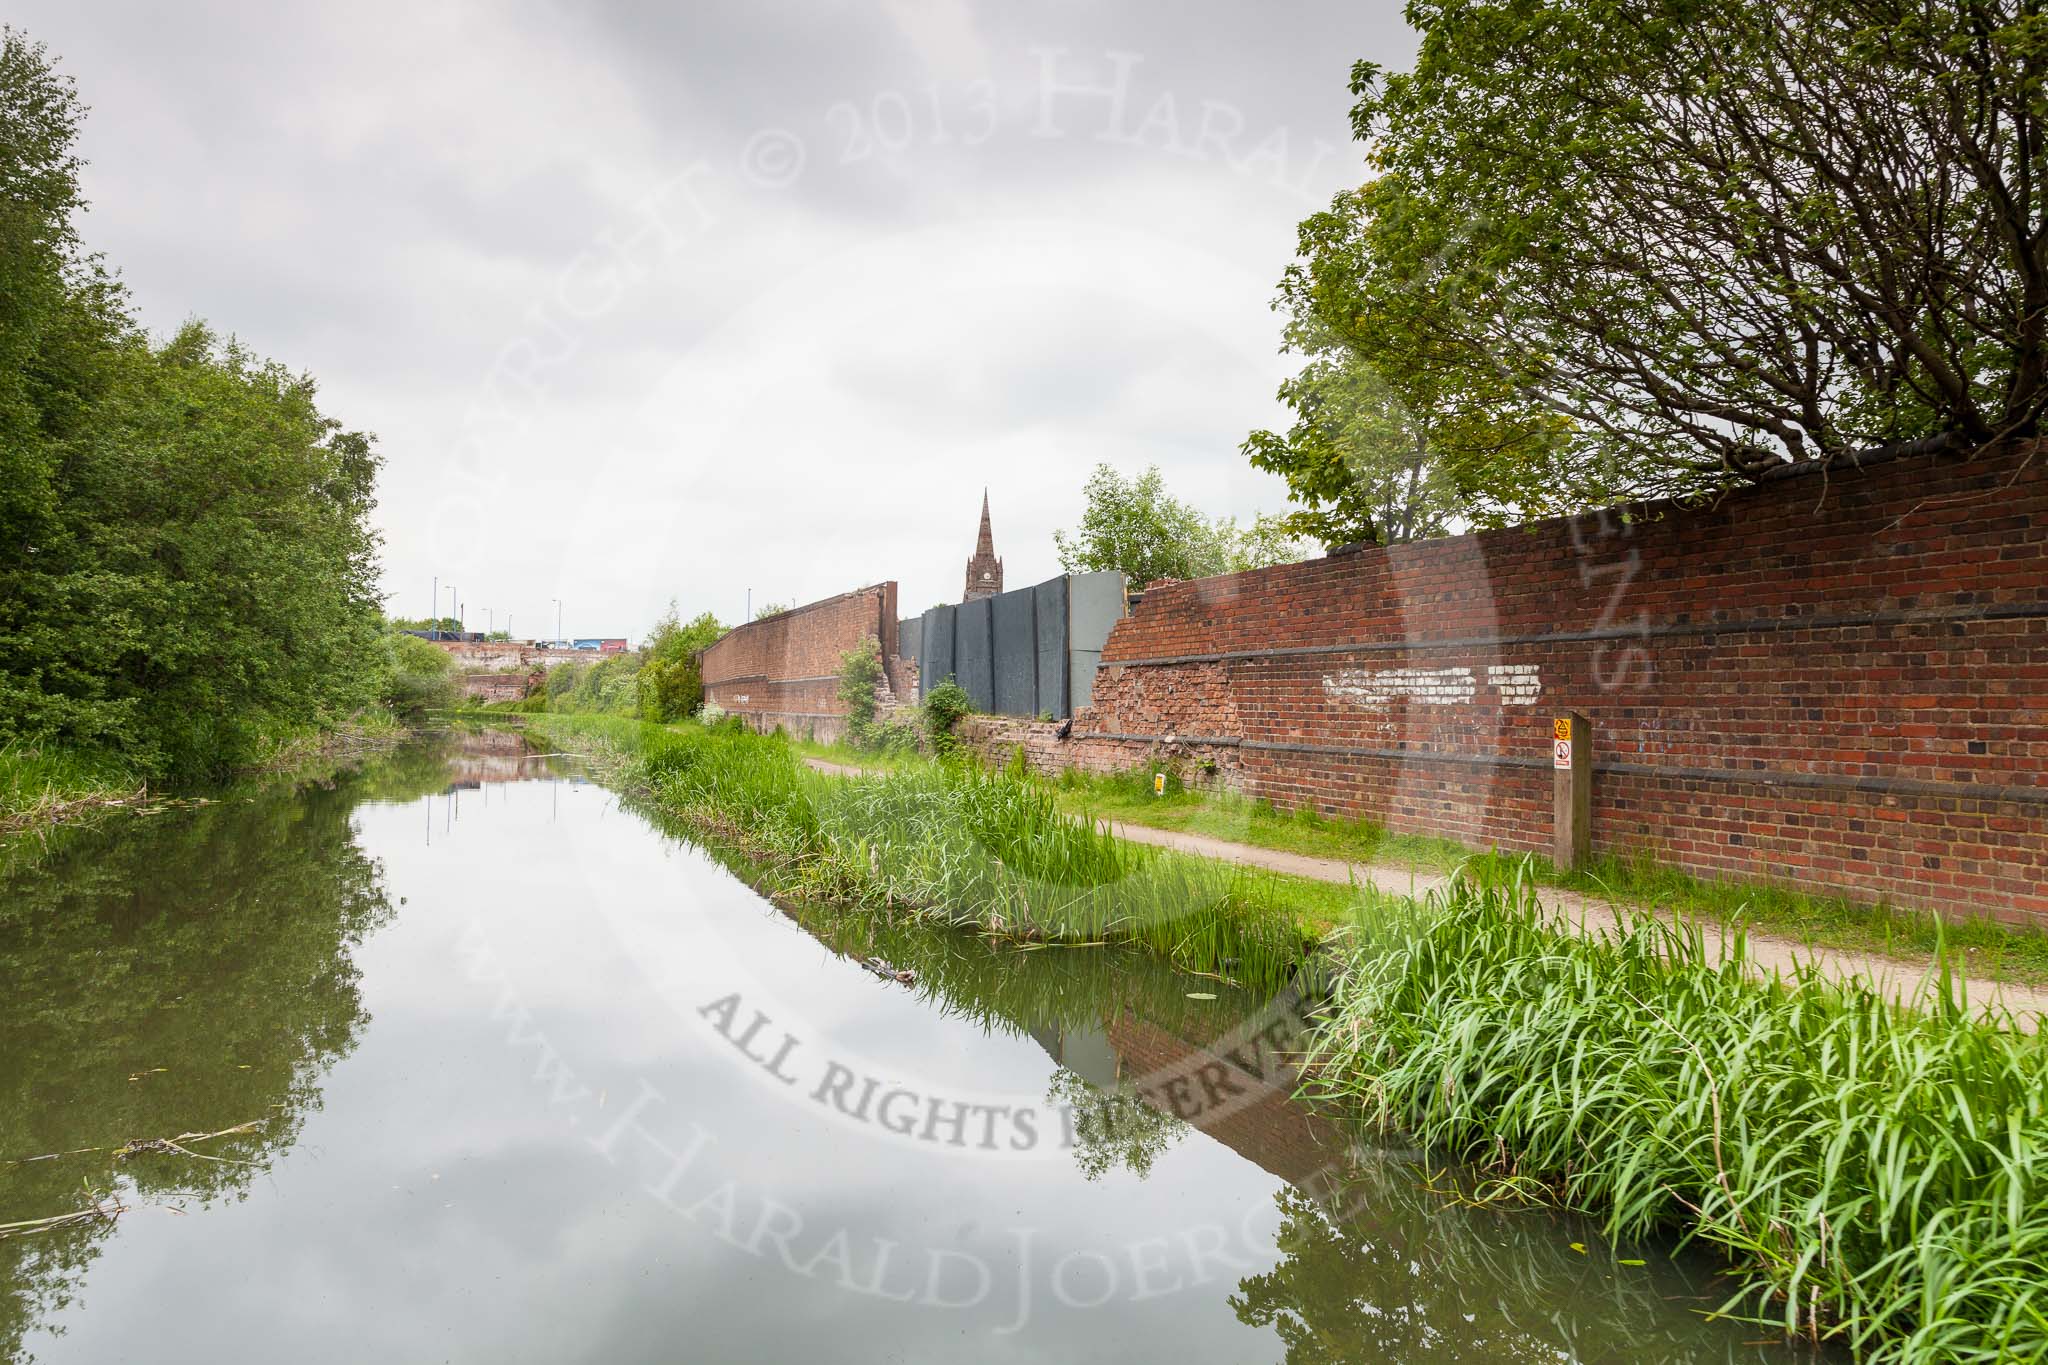 BCN 24h Marathon Challenge 2015: Peaceful scene with old factory walls on the Walsall Canal, on the the sire of a church in Darlsaston.
Birmingham Canal Navigations,



on 23 May 2015 at 15:48, image #127